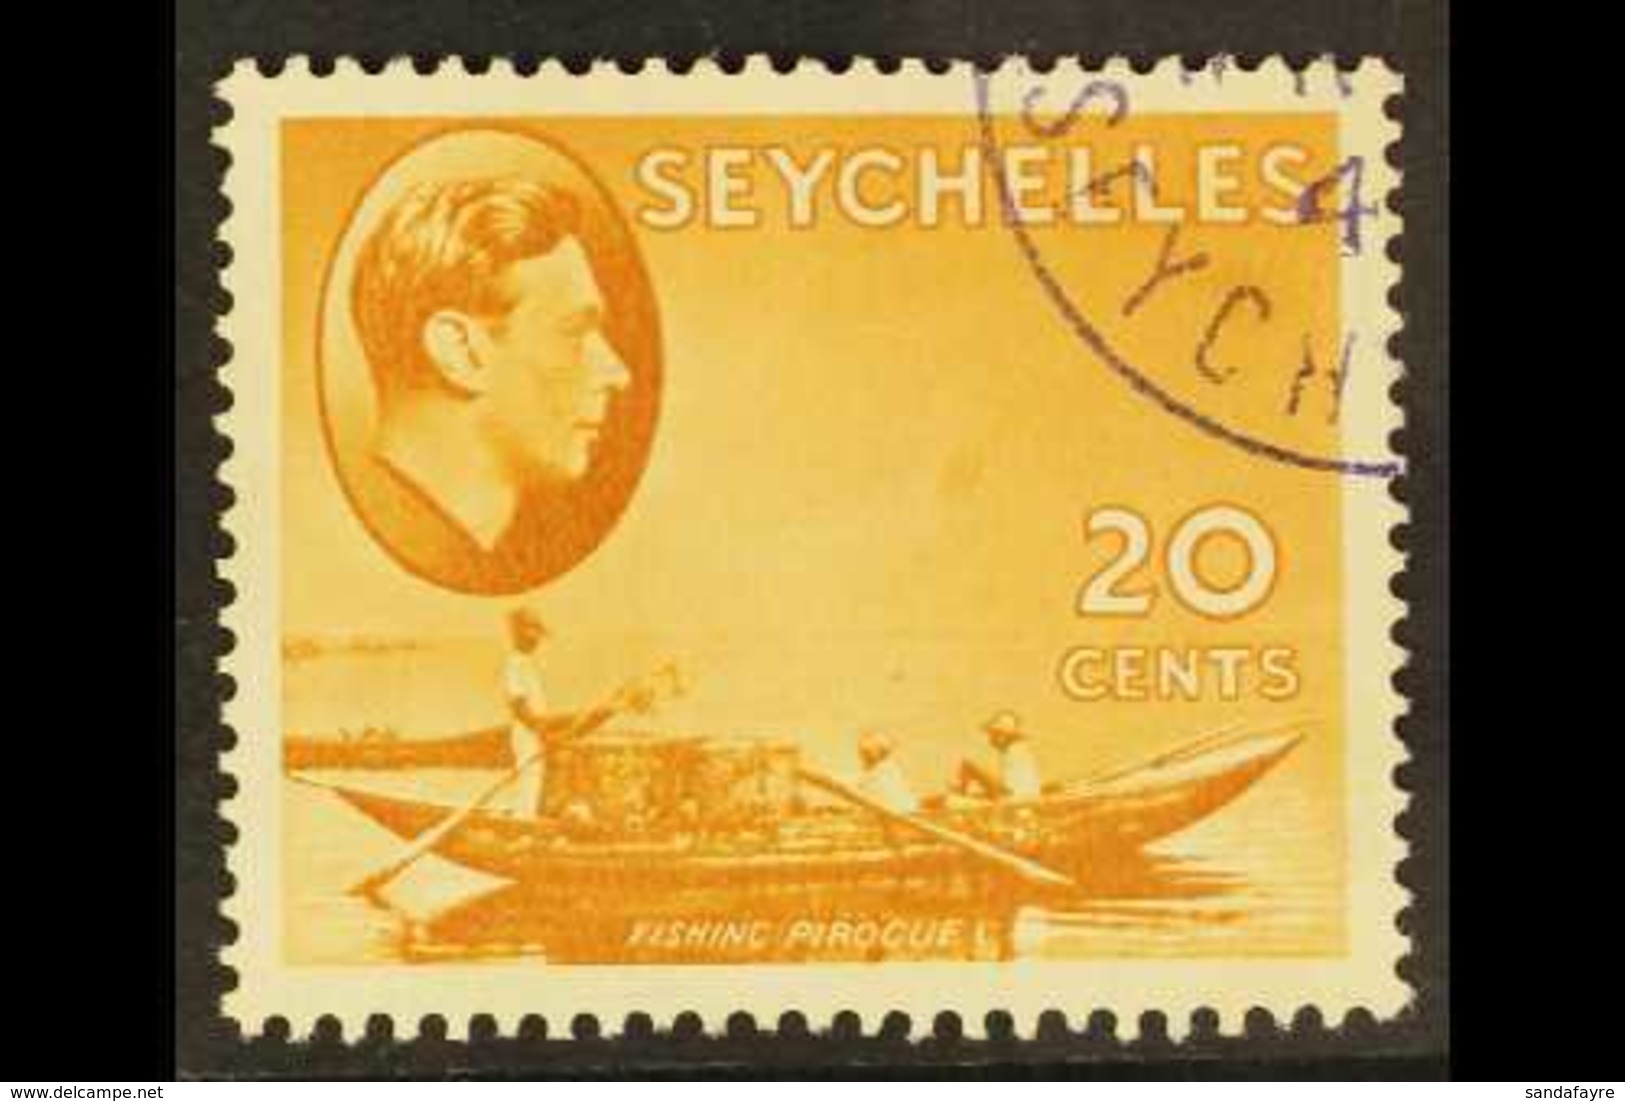 1938-49 20c Brown-ochre Chalky Paper 'HANDKERCHIEF' FLAW Variety, SG 140ab, Superb Cds Used, Very Fresh. For More Images - Seychelles (...-1976)